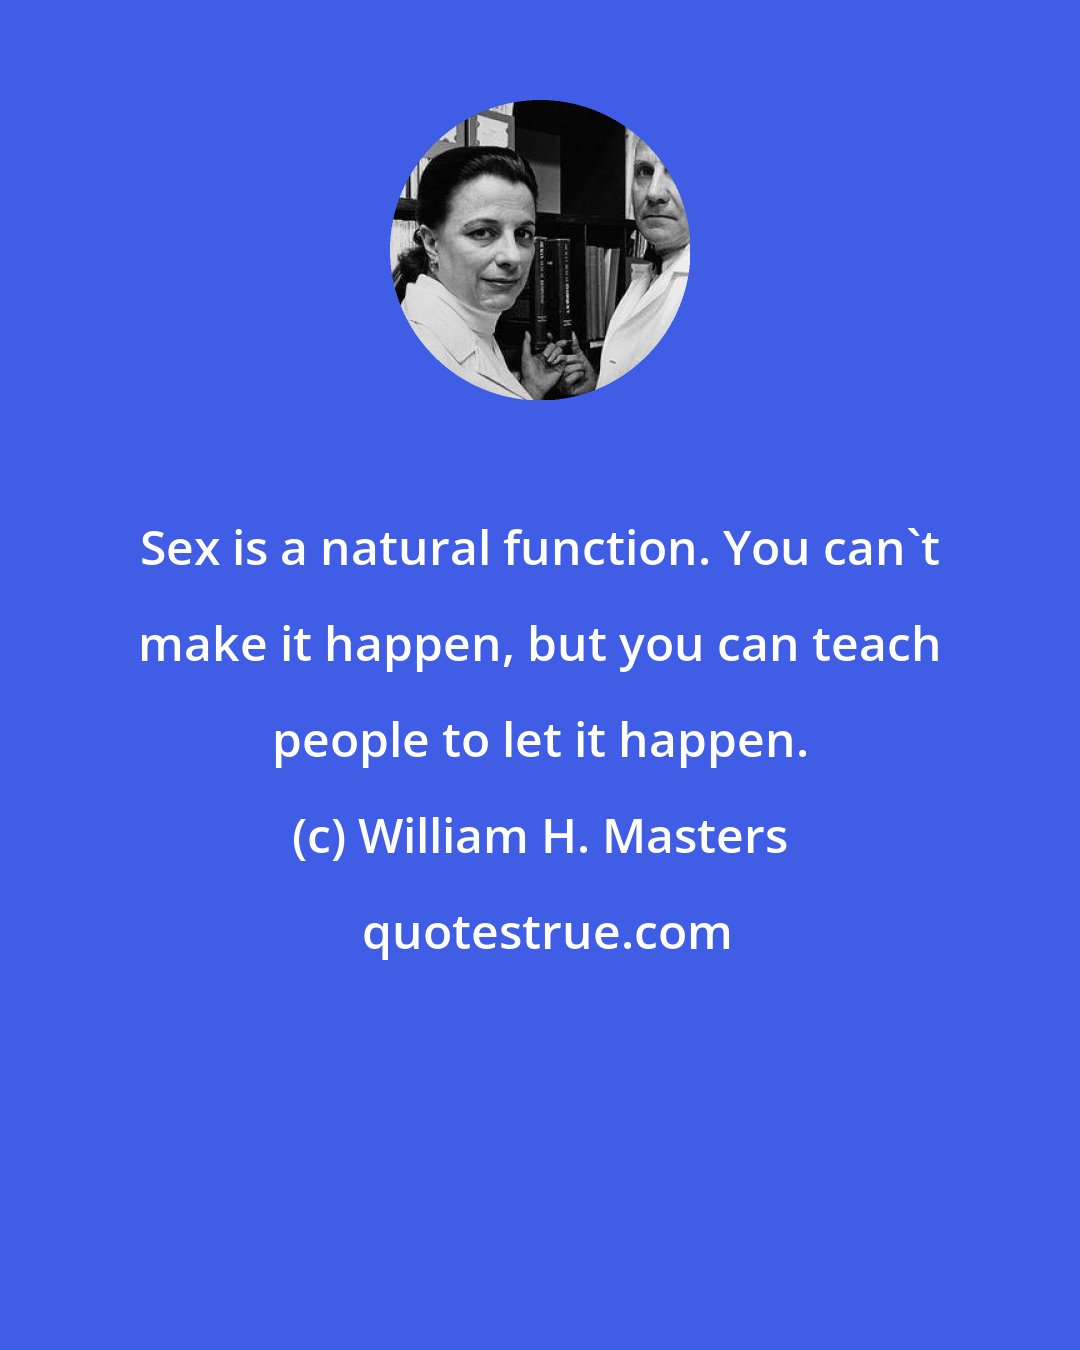 William H. Masters: Sex is a natural function. You can't make it happen, but you can teach people to let it happen.